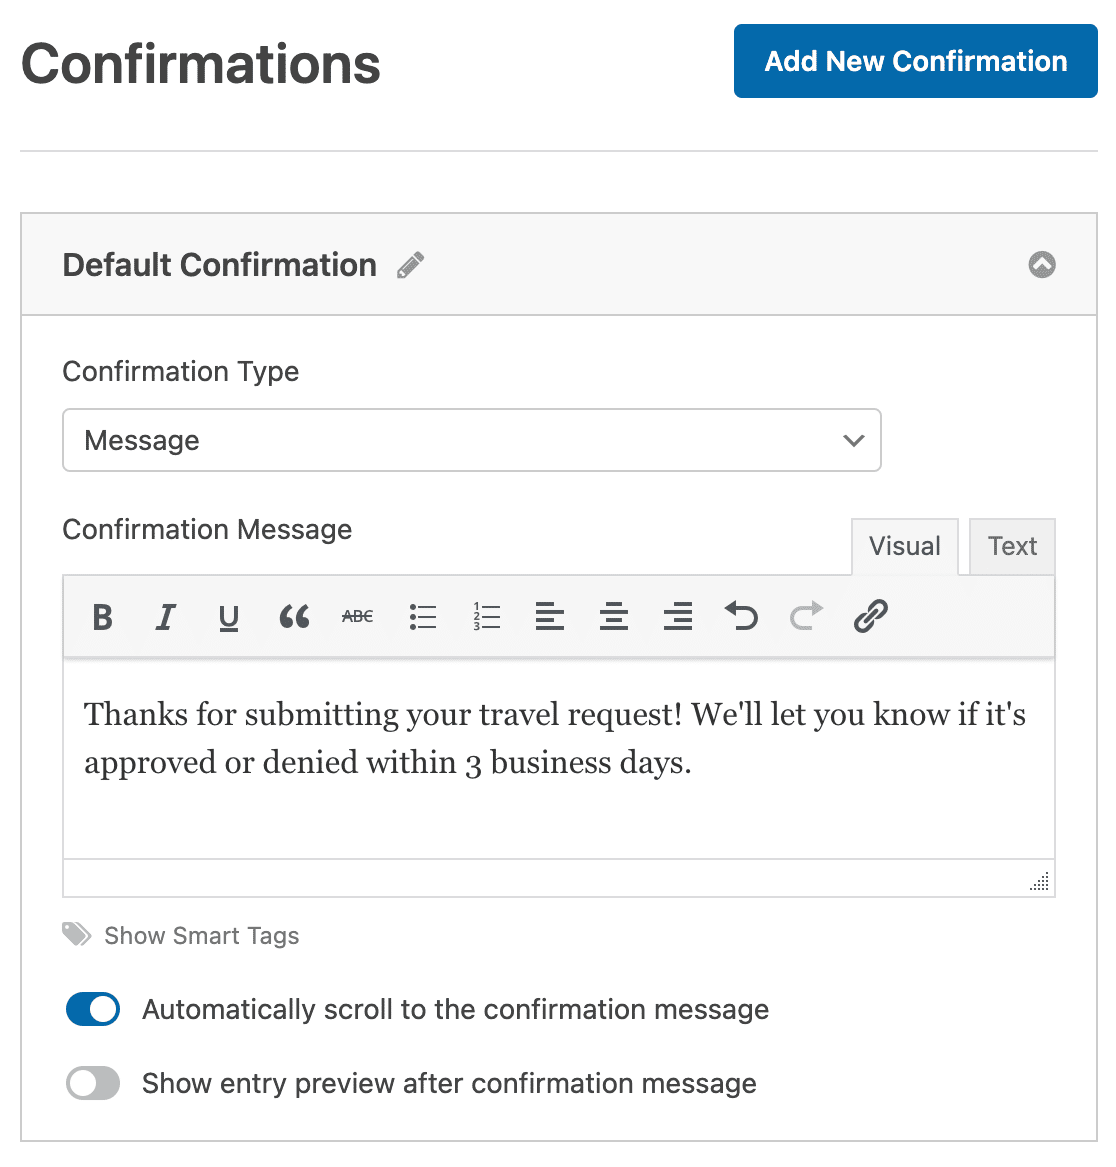 Customizing the travel request form confirmation message